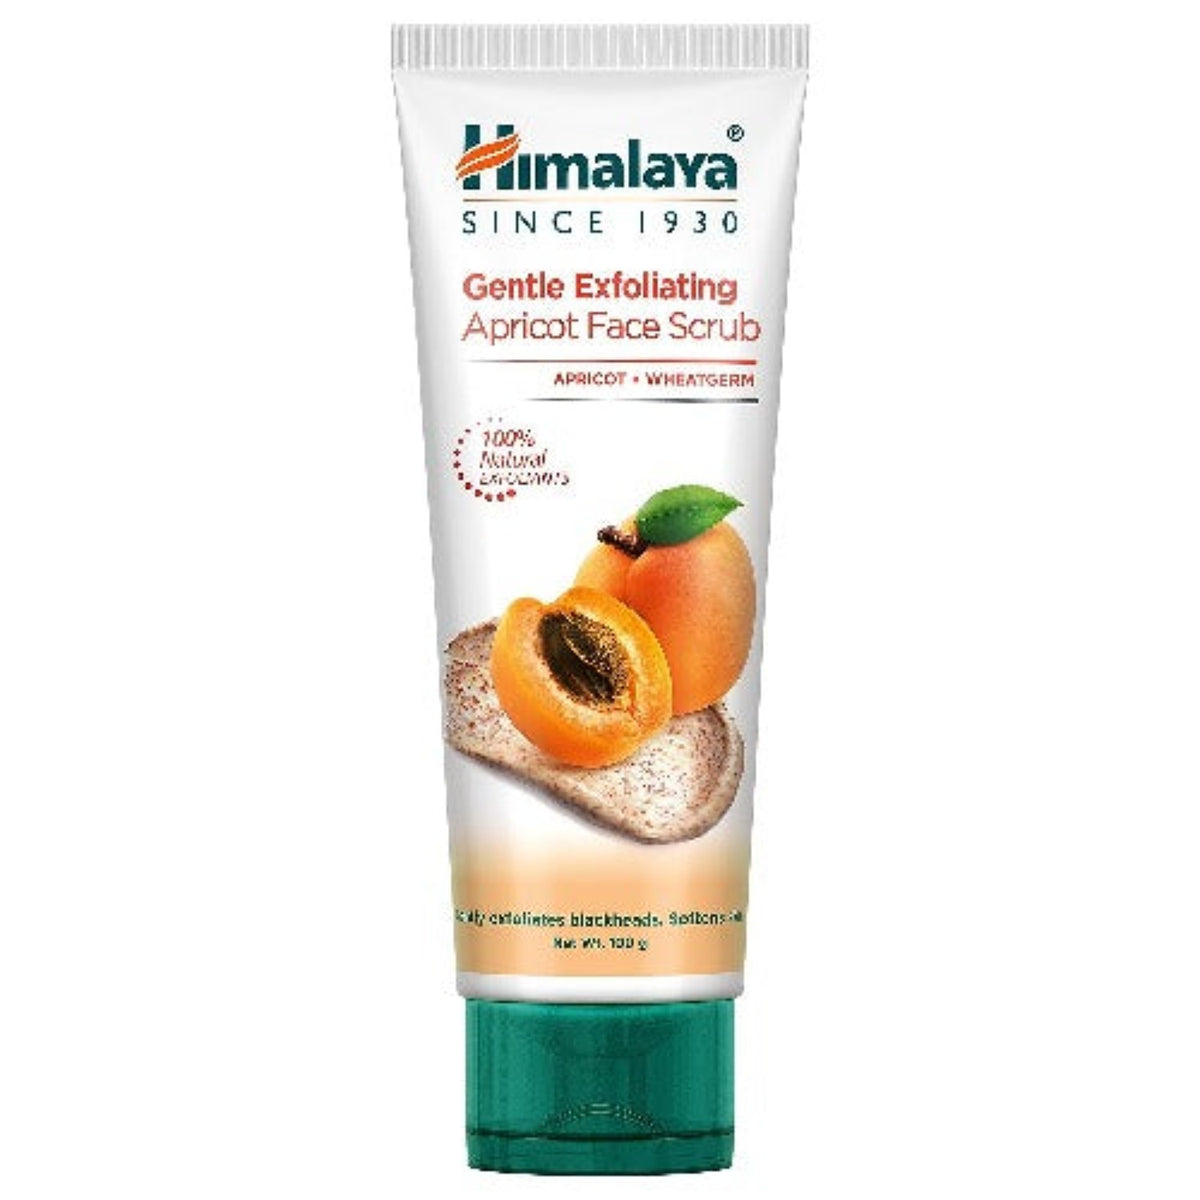 Himalaya Herbal Ayurvedic Personal Care Gentle Exfoliating Apricot Removes Dead Skin Cells & Blackheads Nourishes Skin Face Scrub